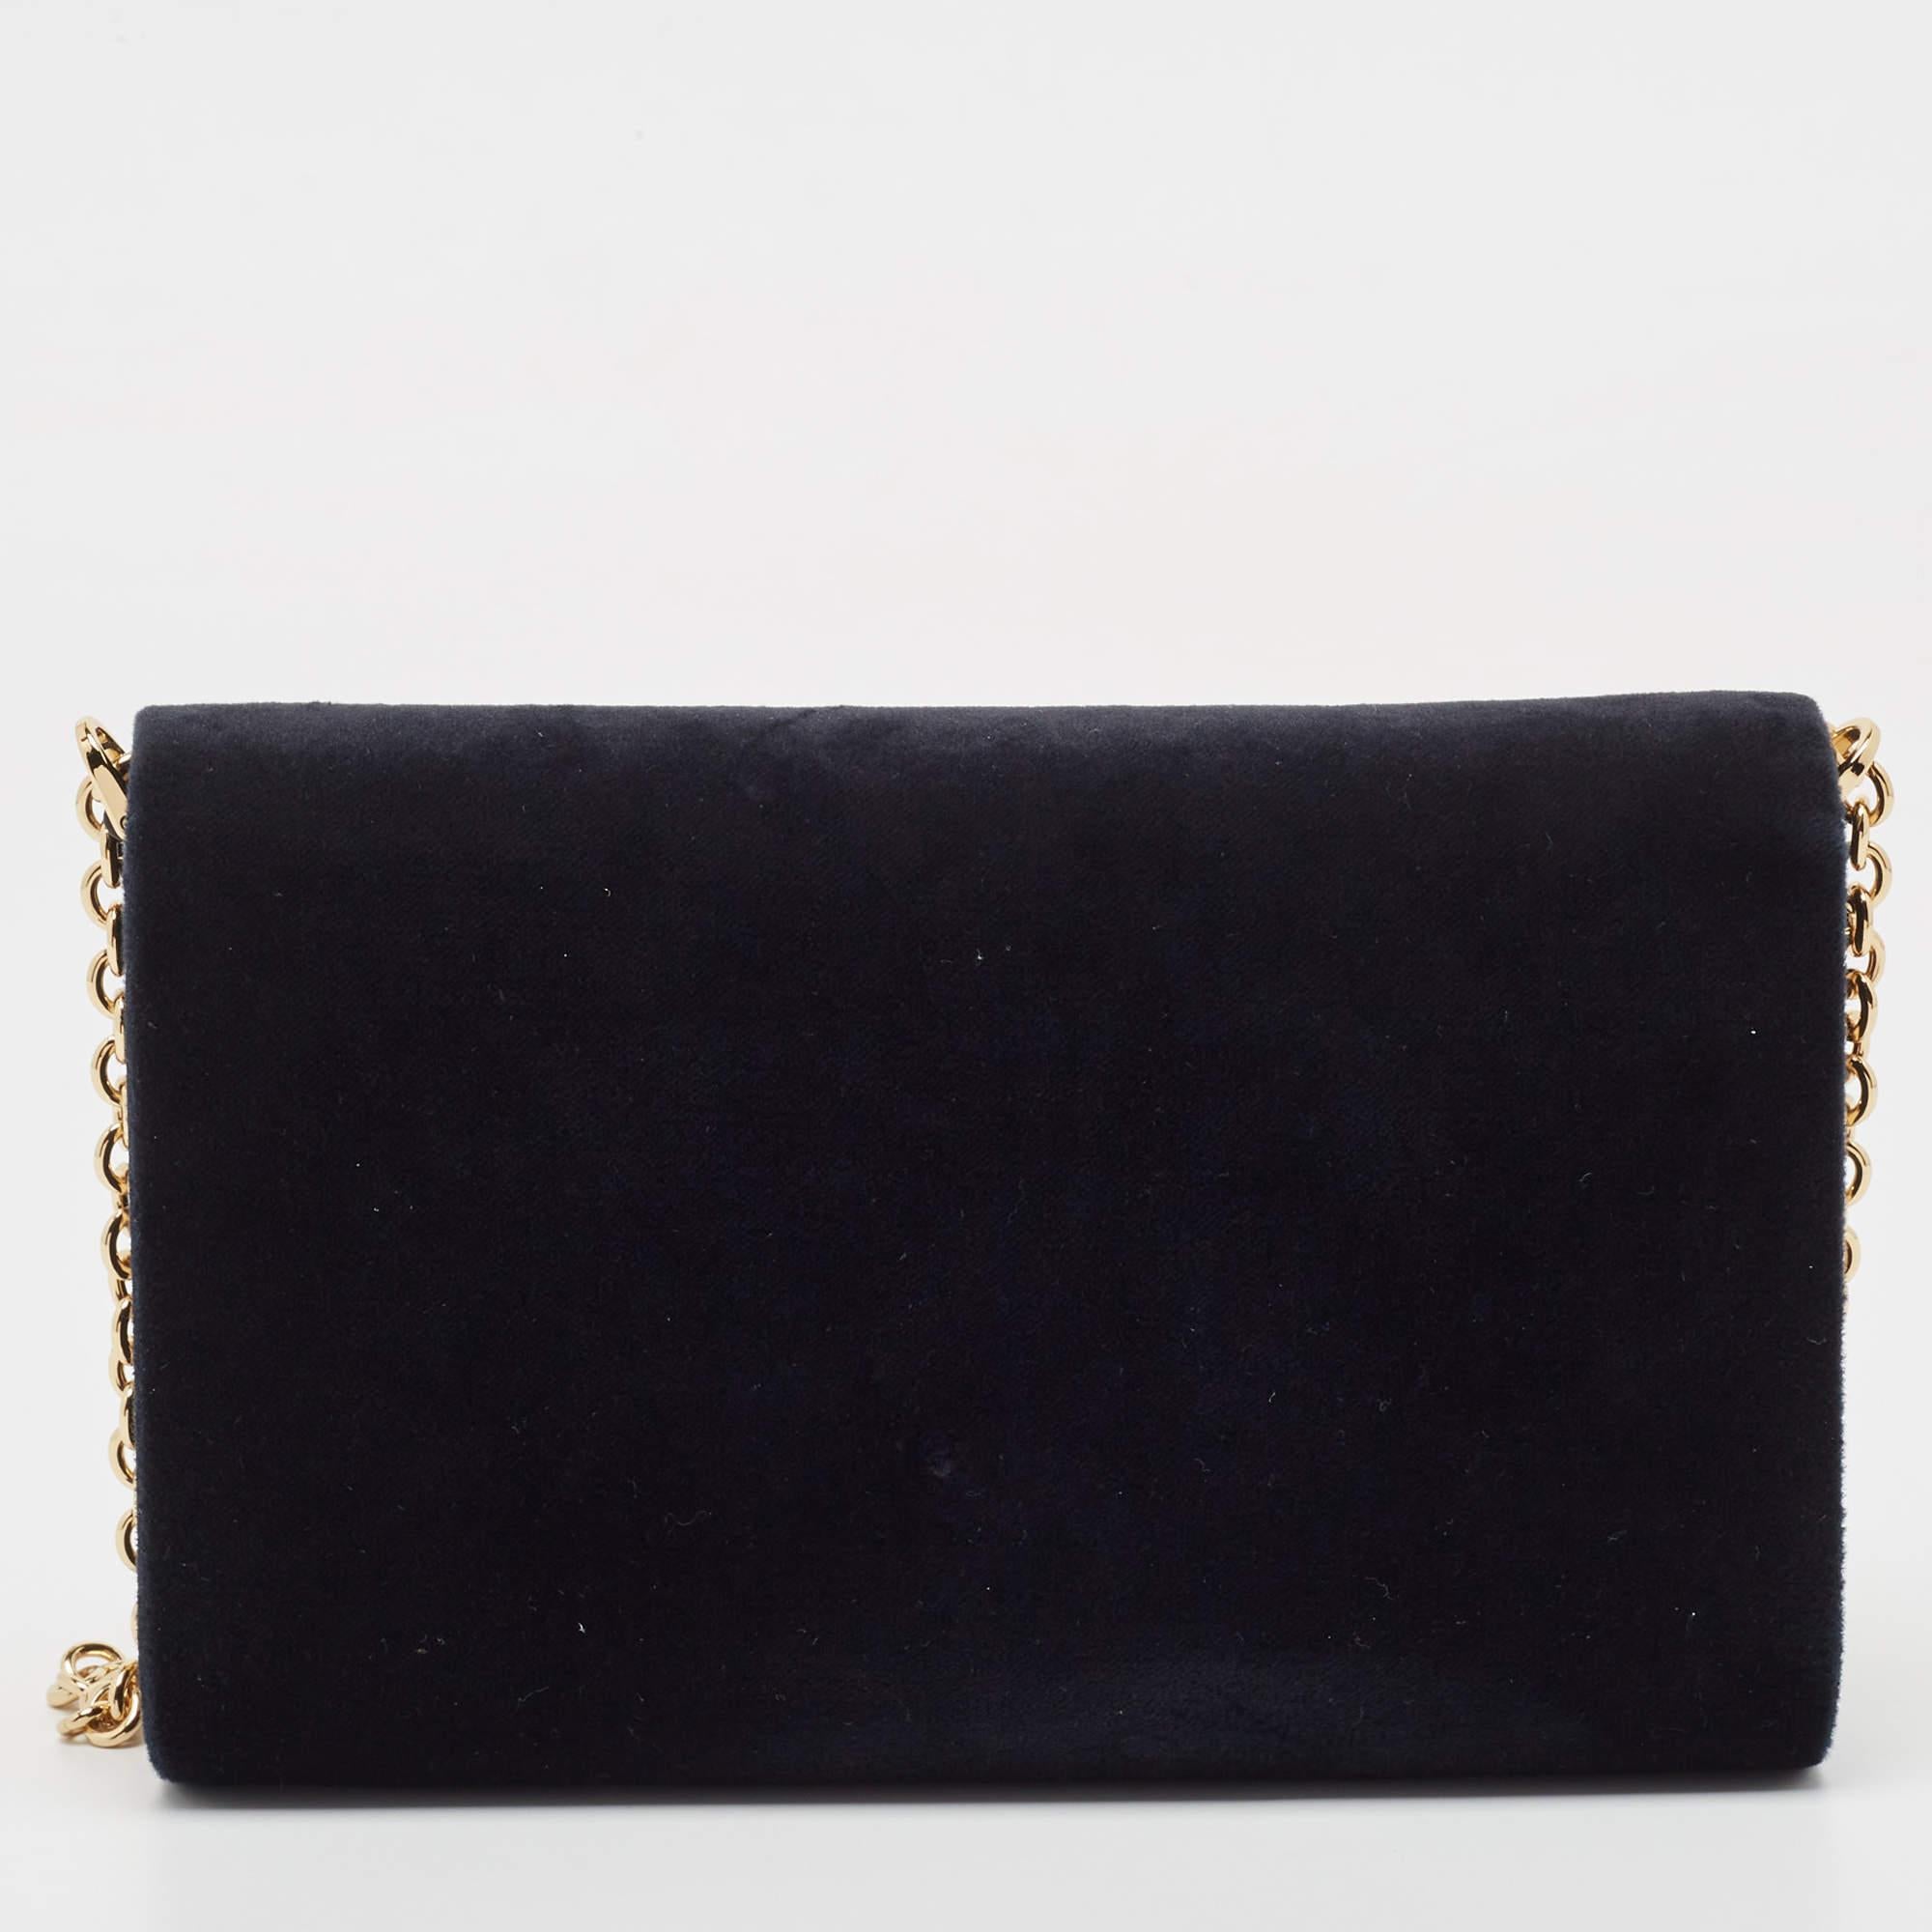 Trust this Dolce & Gabbana chain clutch to be light, durable, and comfortable to carry. It is crafted beautifully using the best materials to be a durable style ally.

Includes: Original Dustbag, Detachable Chain Strap